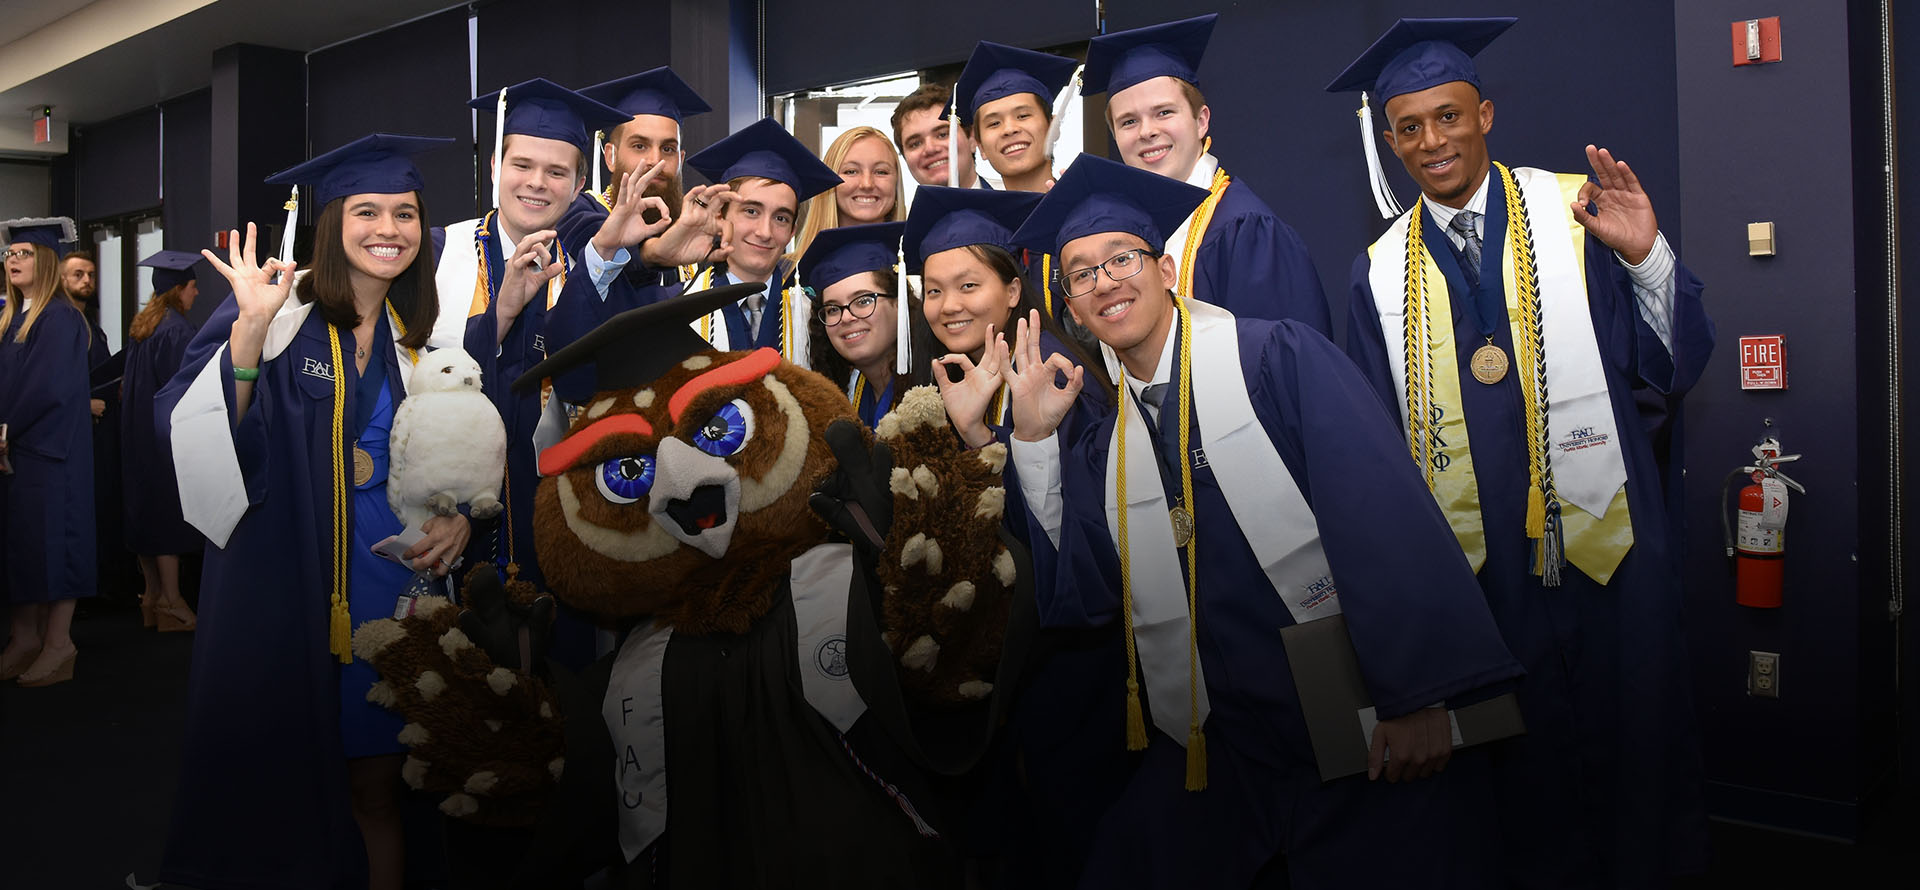 FAU Mascot Owlsley standing with Honors College graduates in regalia